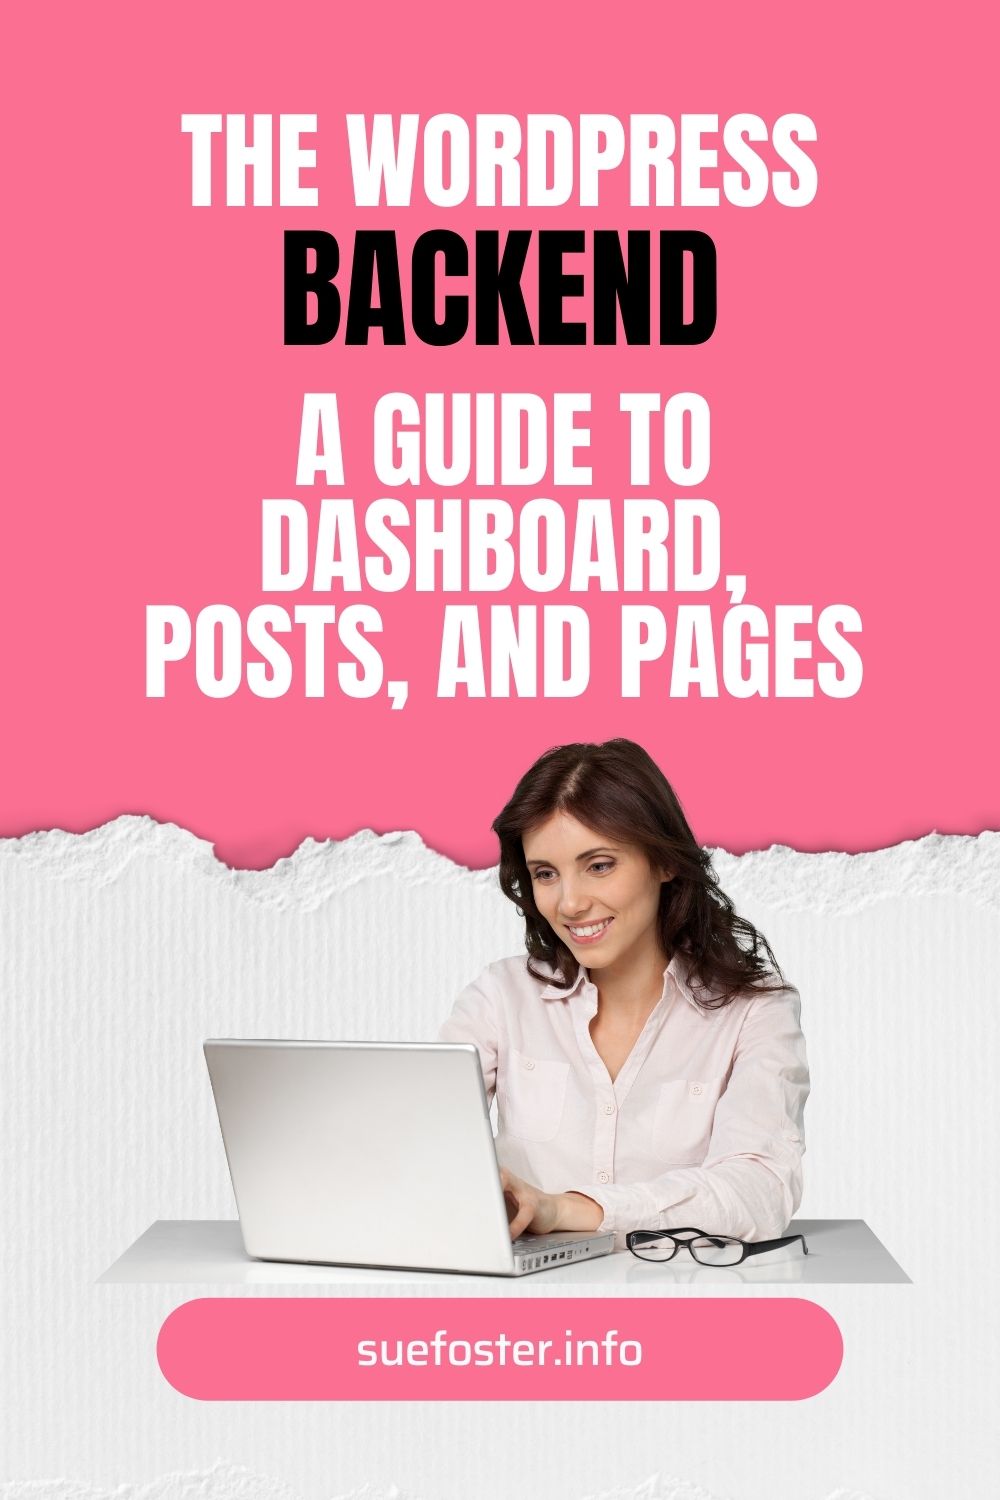 Understand the WordPress backend. Grasp the difference between posts and pages. Start your website journey with my beginner's guide!